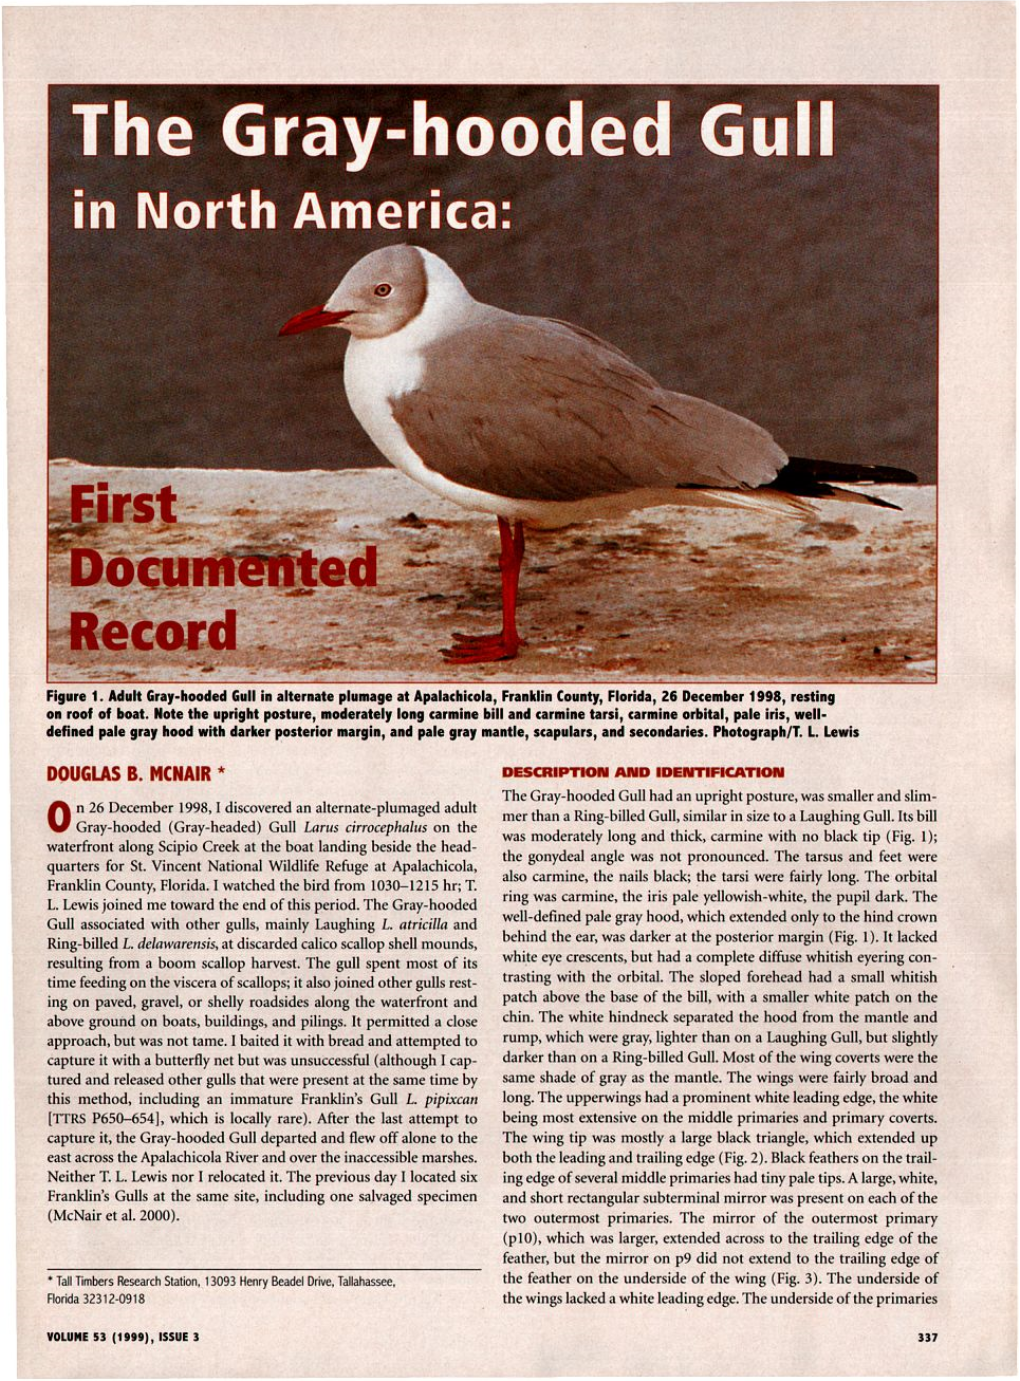 The Gray-Hooded Gull in North America: First Documented Record